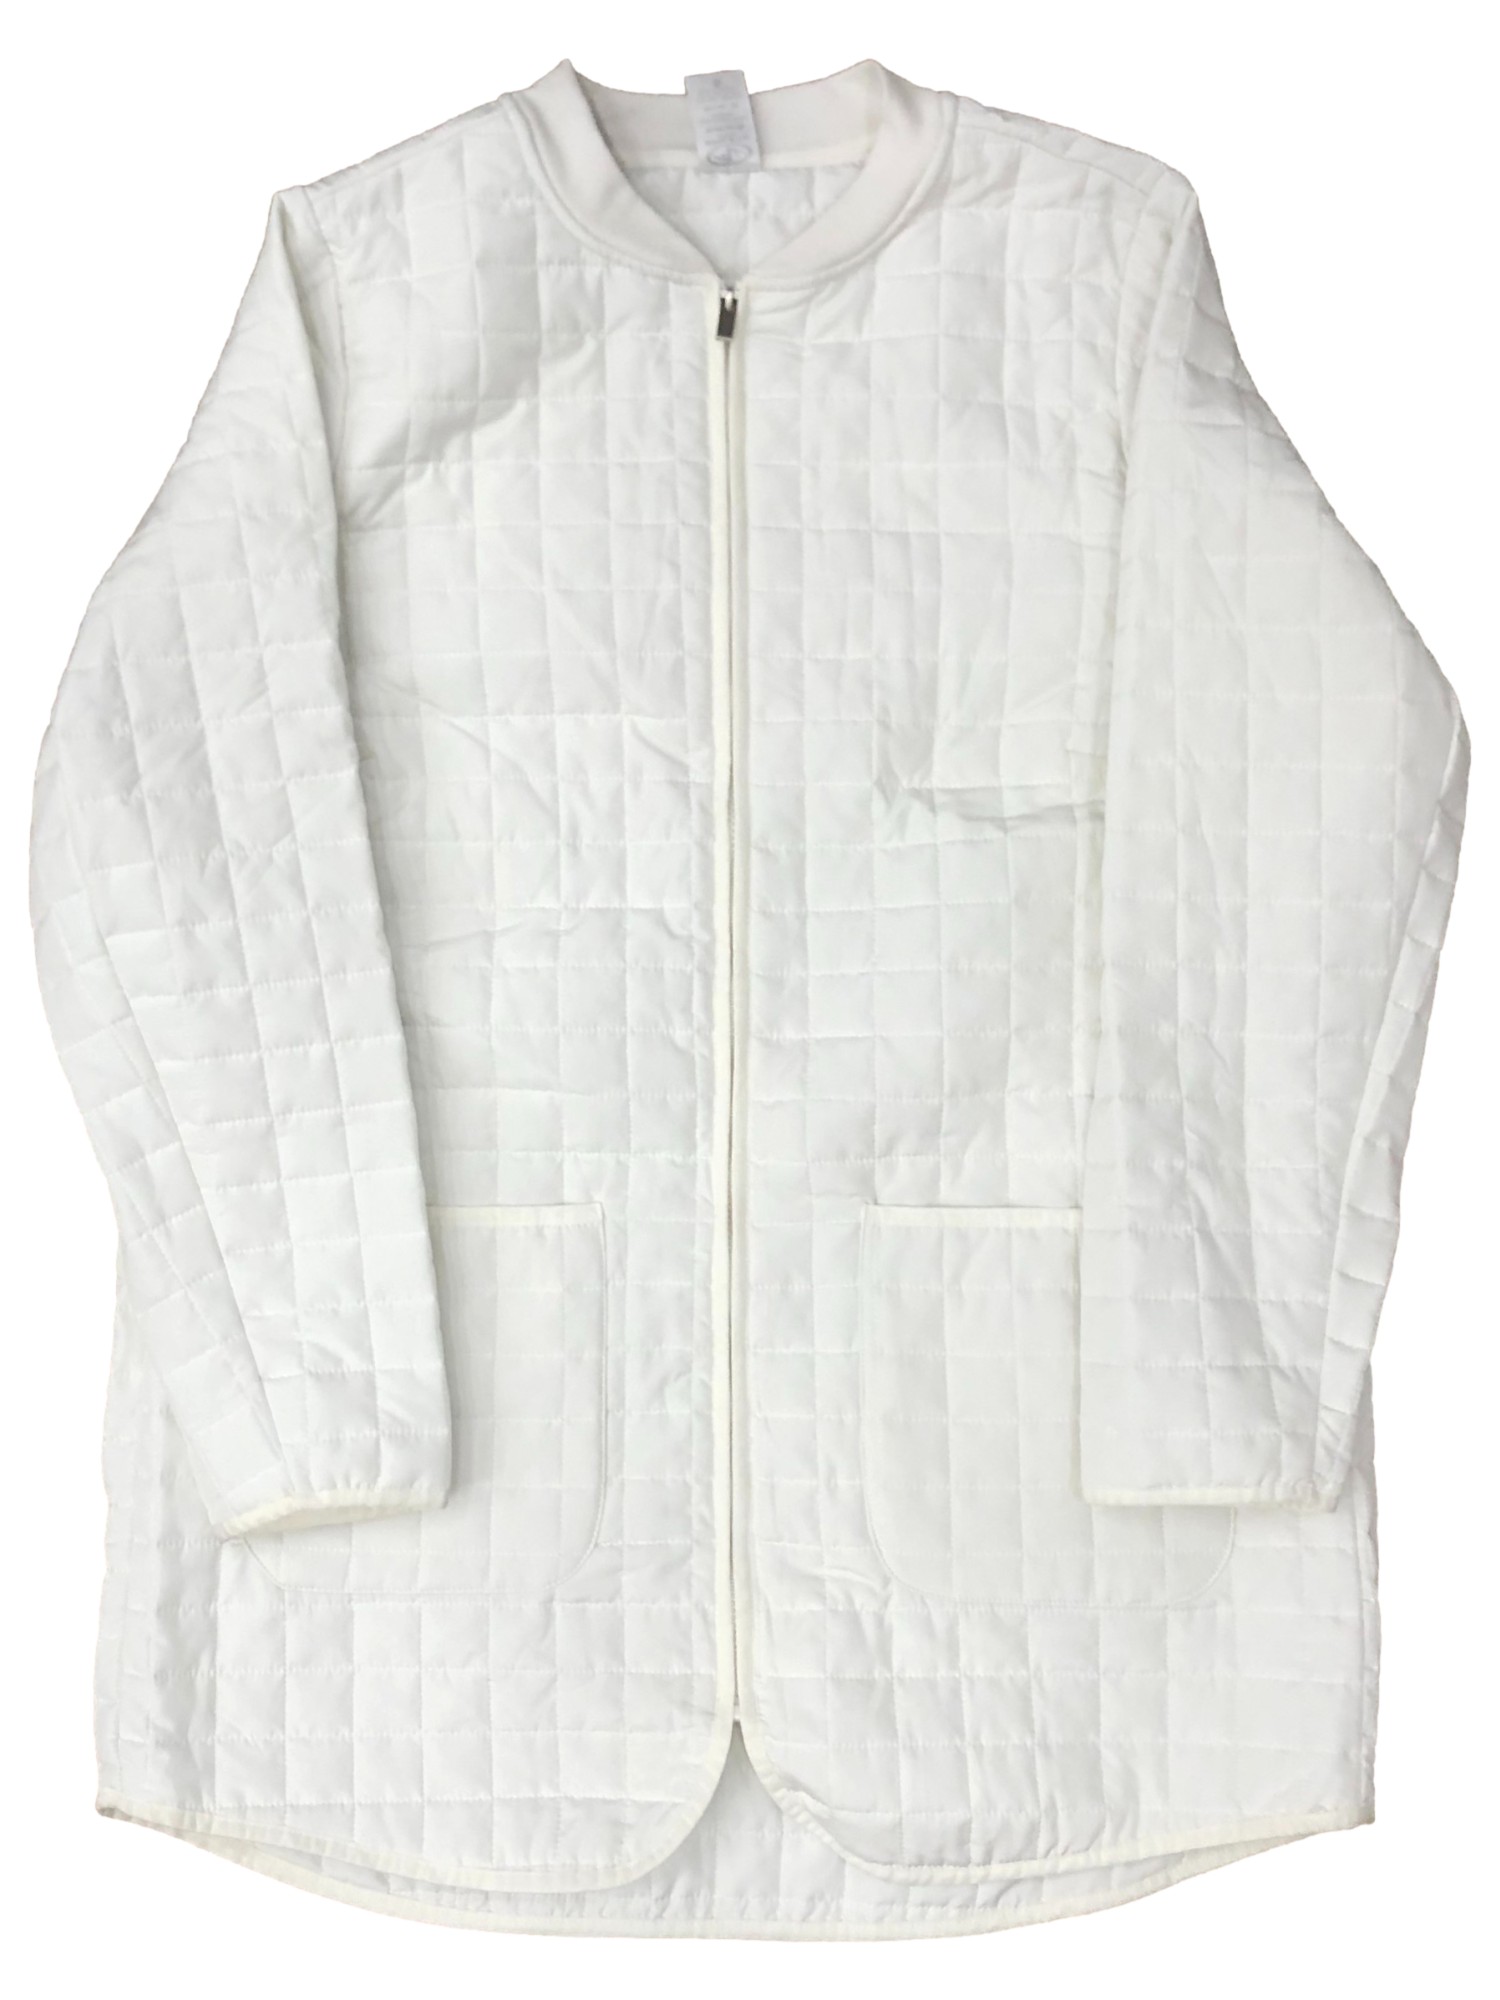 Athletic Works Womens Lightweight Ivory Quilted Coat Long Insulated Athletic Jacket XL (16-18)